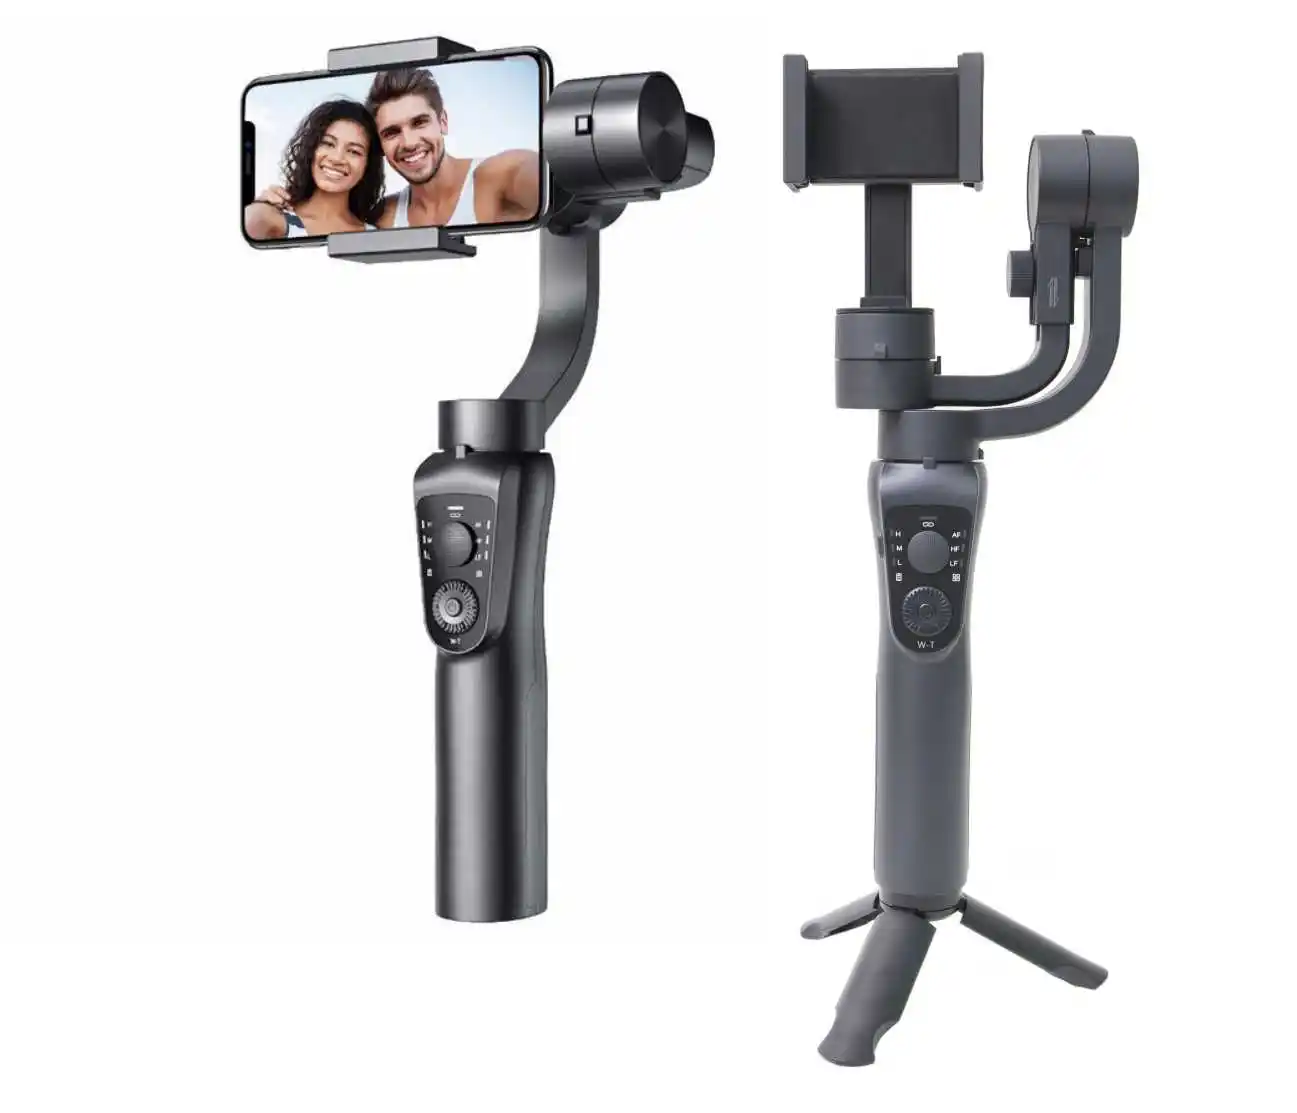 S5B Handheld Phone Gimbal stabilizer VLOG Selfie Auto Face Tracking 3 axis Anti-Shake Camera Stabilizer With Tripod